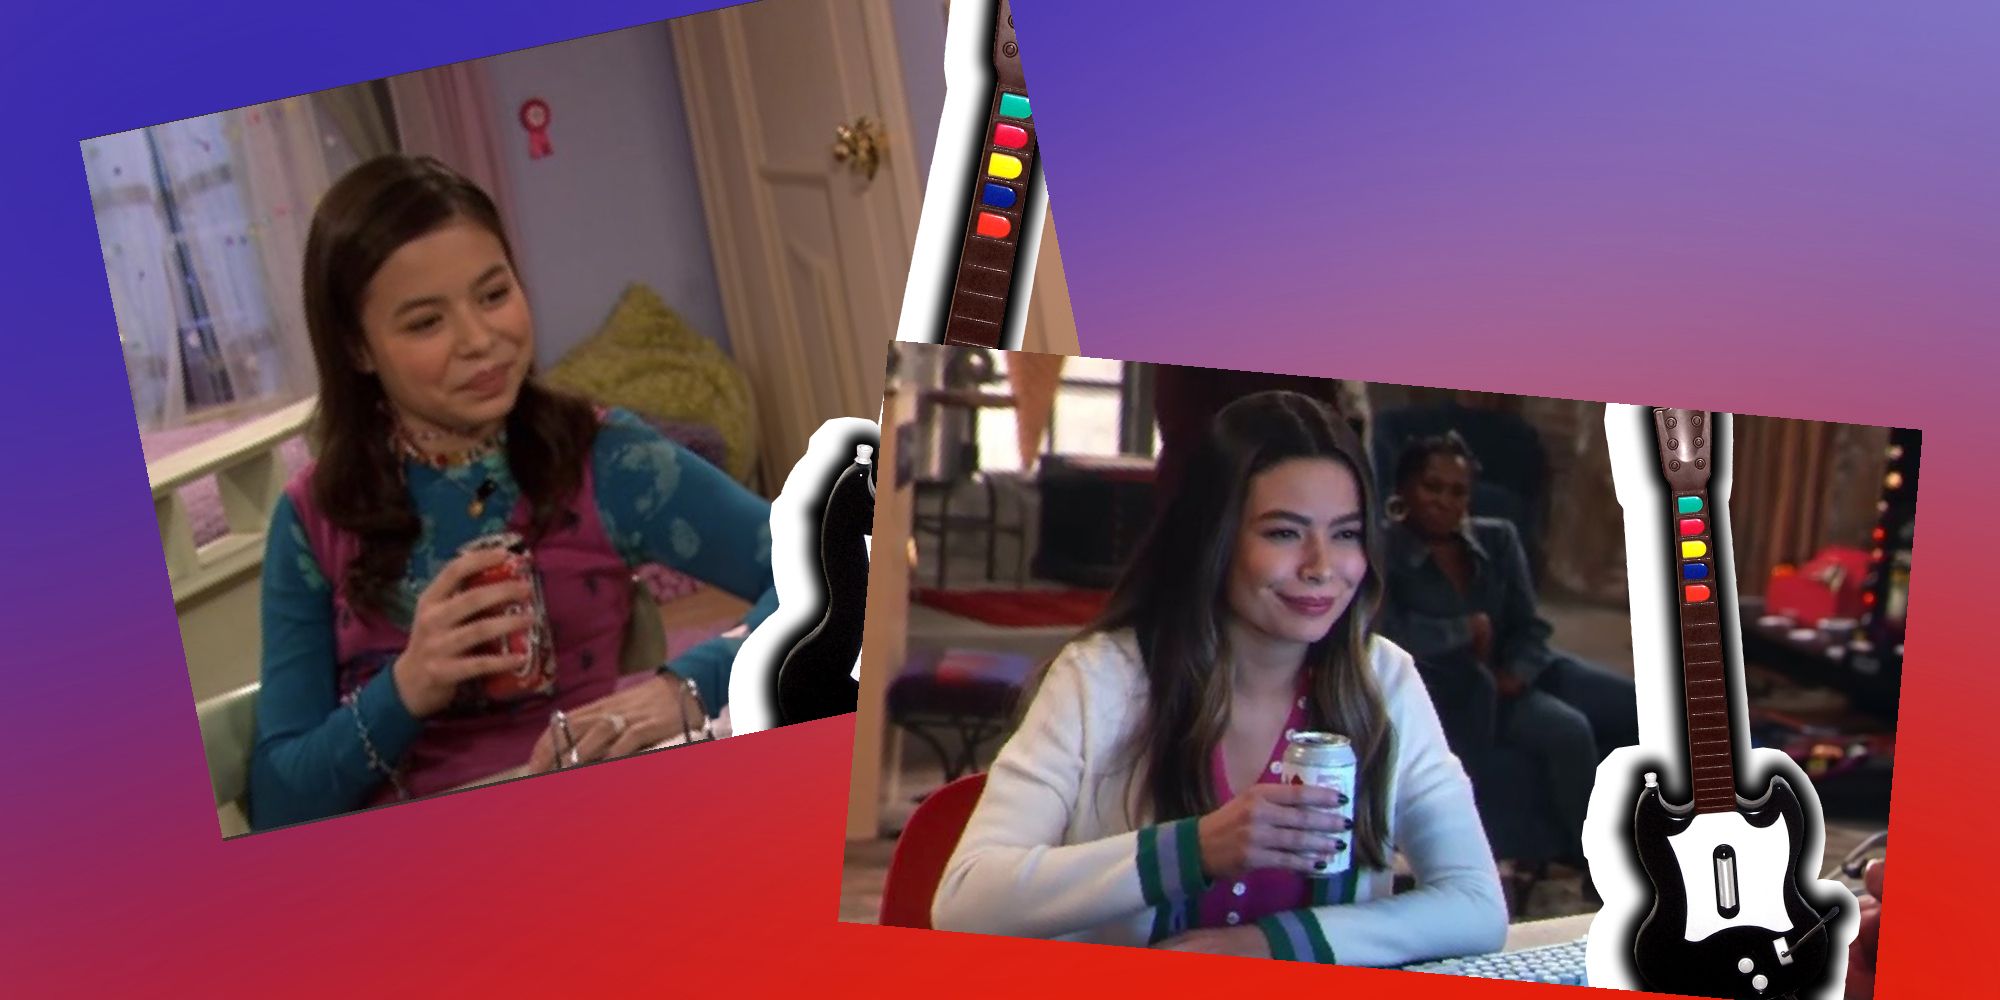 Young Miranda Cosgrove with a soda on the left and older Miranda Cosgrove on the right, both next to Guitar Hero guitars.